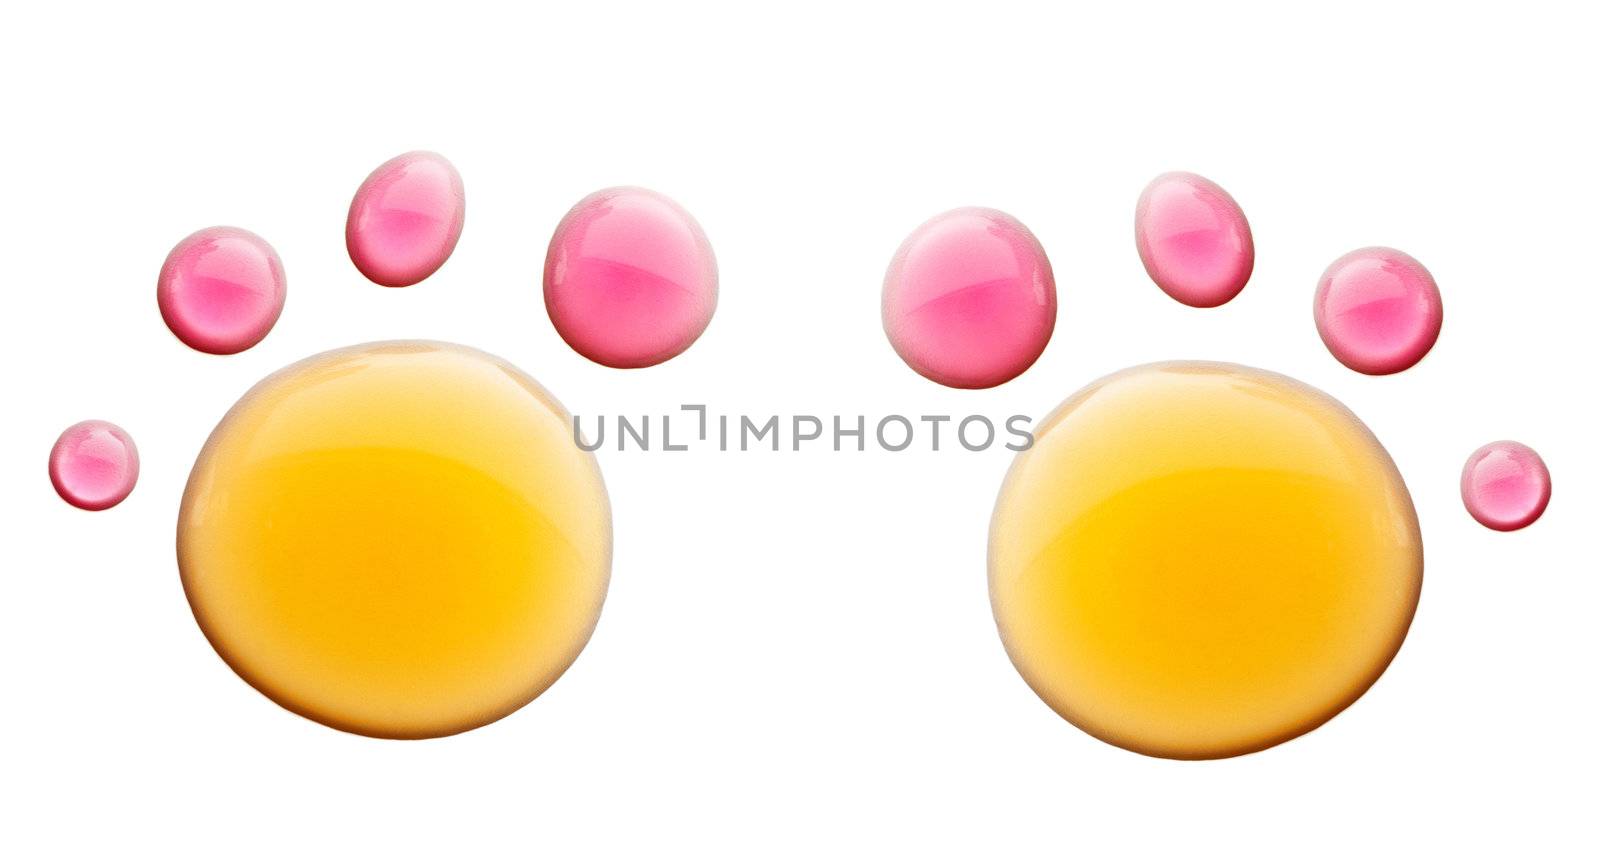 Animal's paw from the water drops on a white background